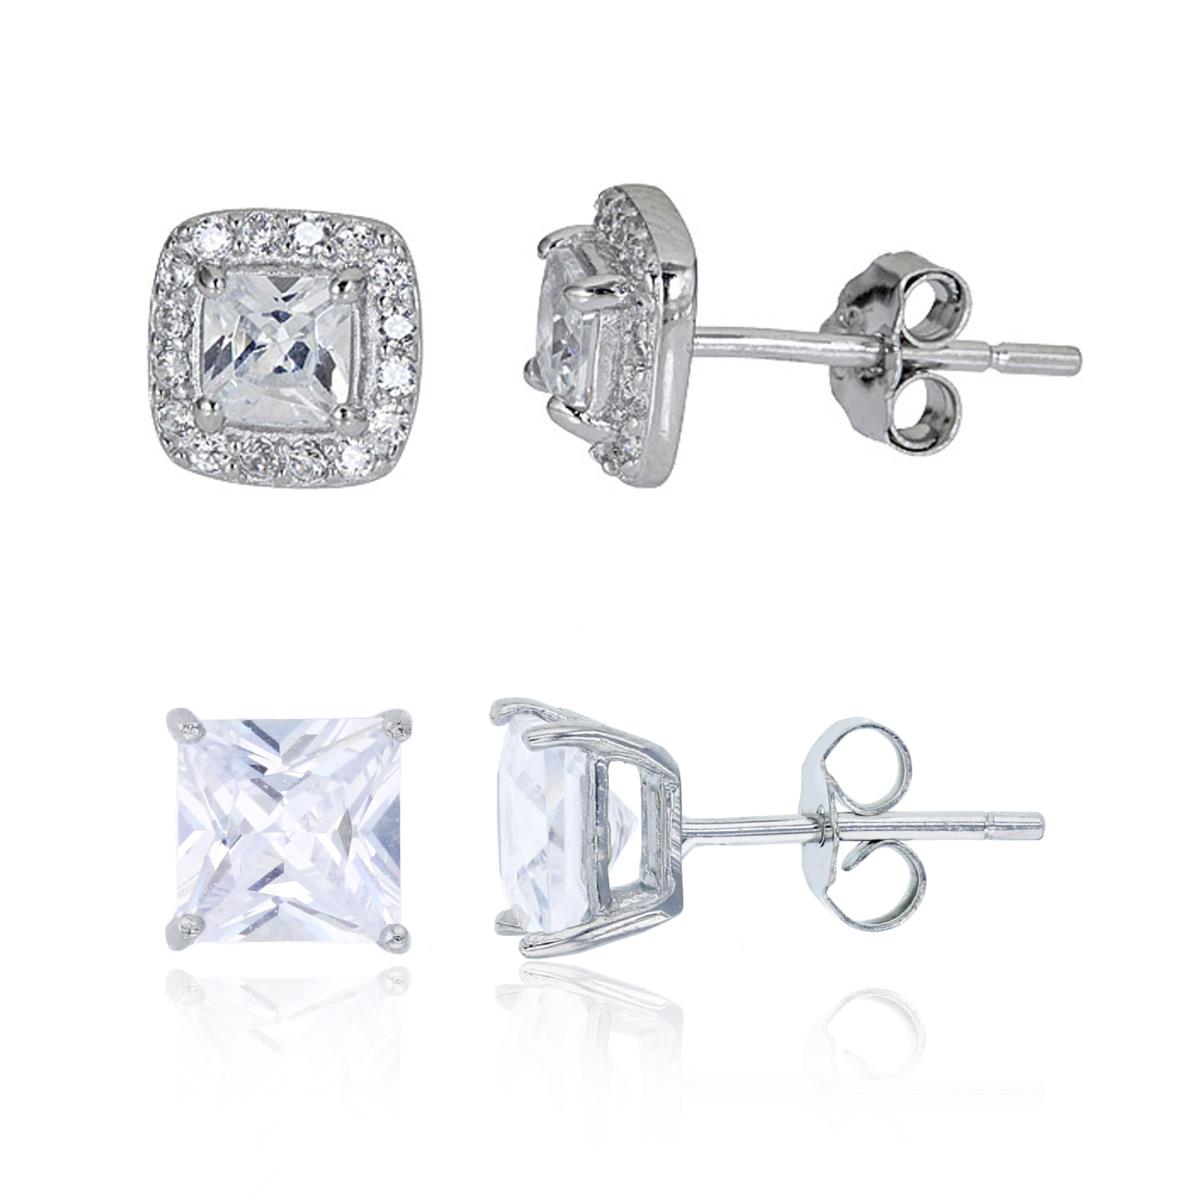 Sterling Silver Square Halo Petite Pave & 6x6mm Square Cut CZ Solitaire Stud Earrings Set